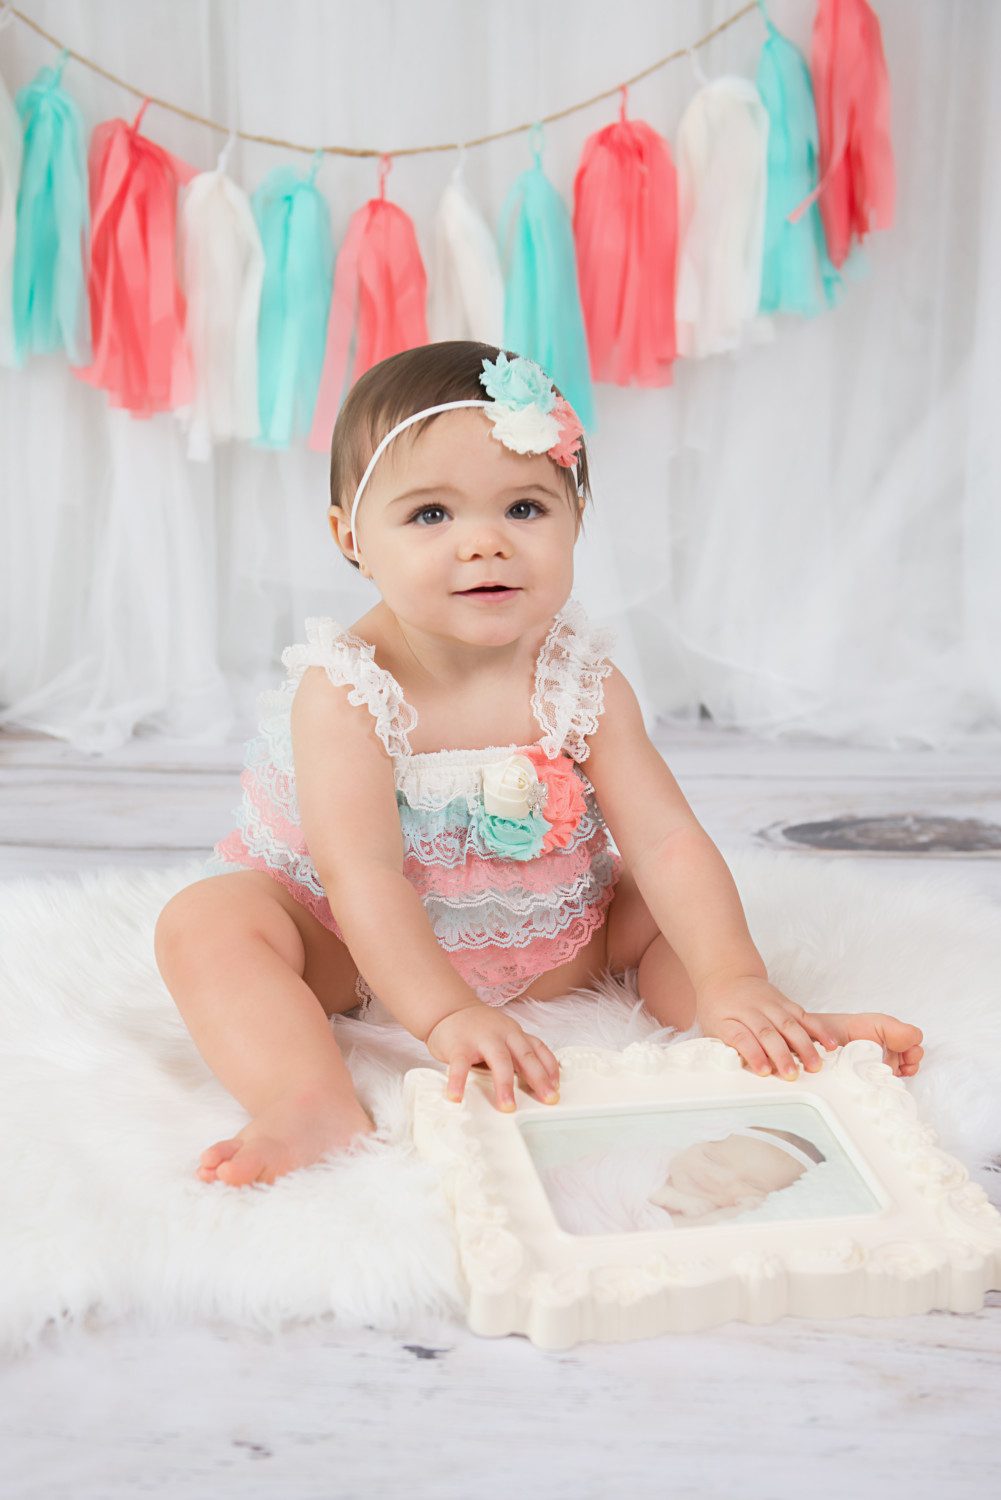 Ellery's First Birthday Session, jenn carroll photography, jenn carroll, session, first birthday photography, smash cake session, family photography, first birthday, smash cake session, baby girl, tampa baby photography, tampa, zephyrhills, wesley chapel photographer, florida photographer